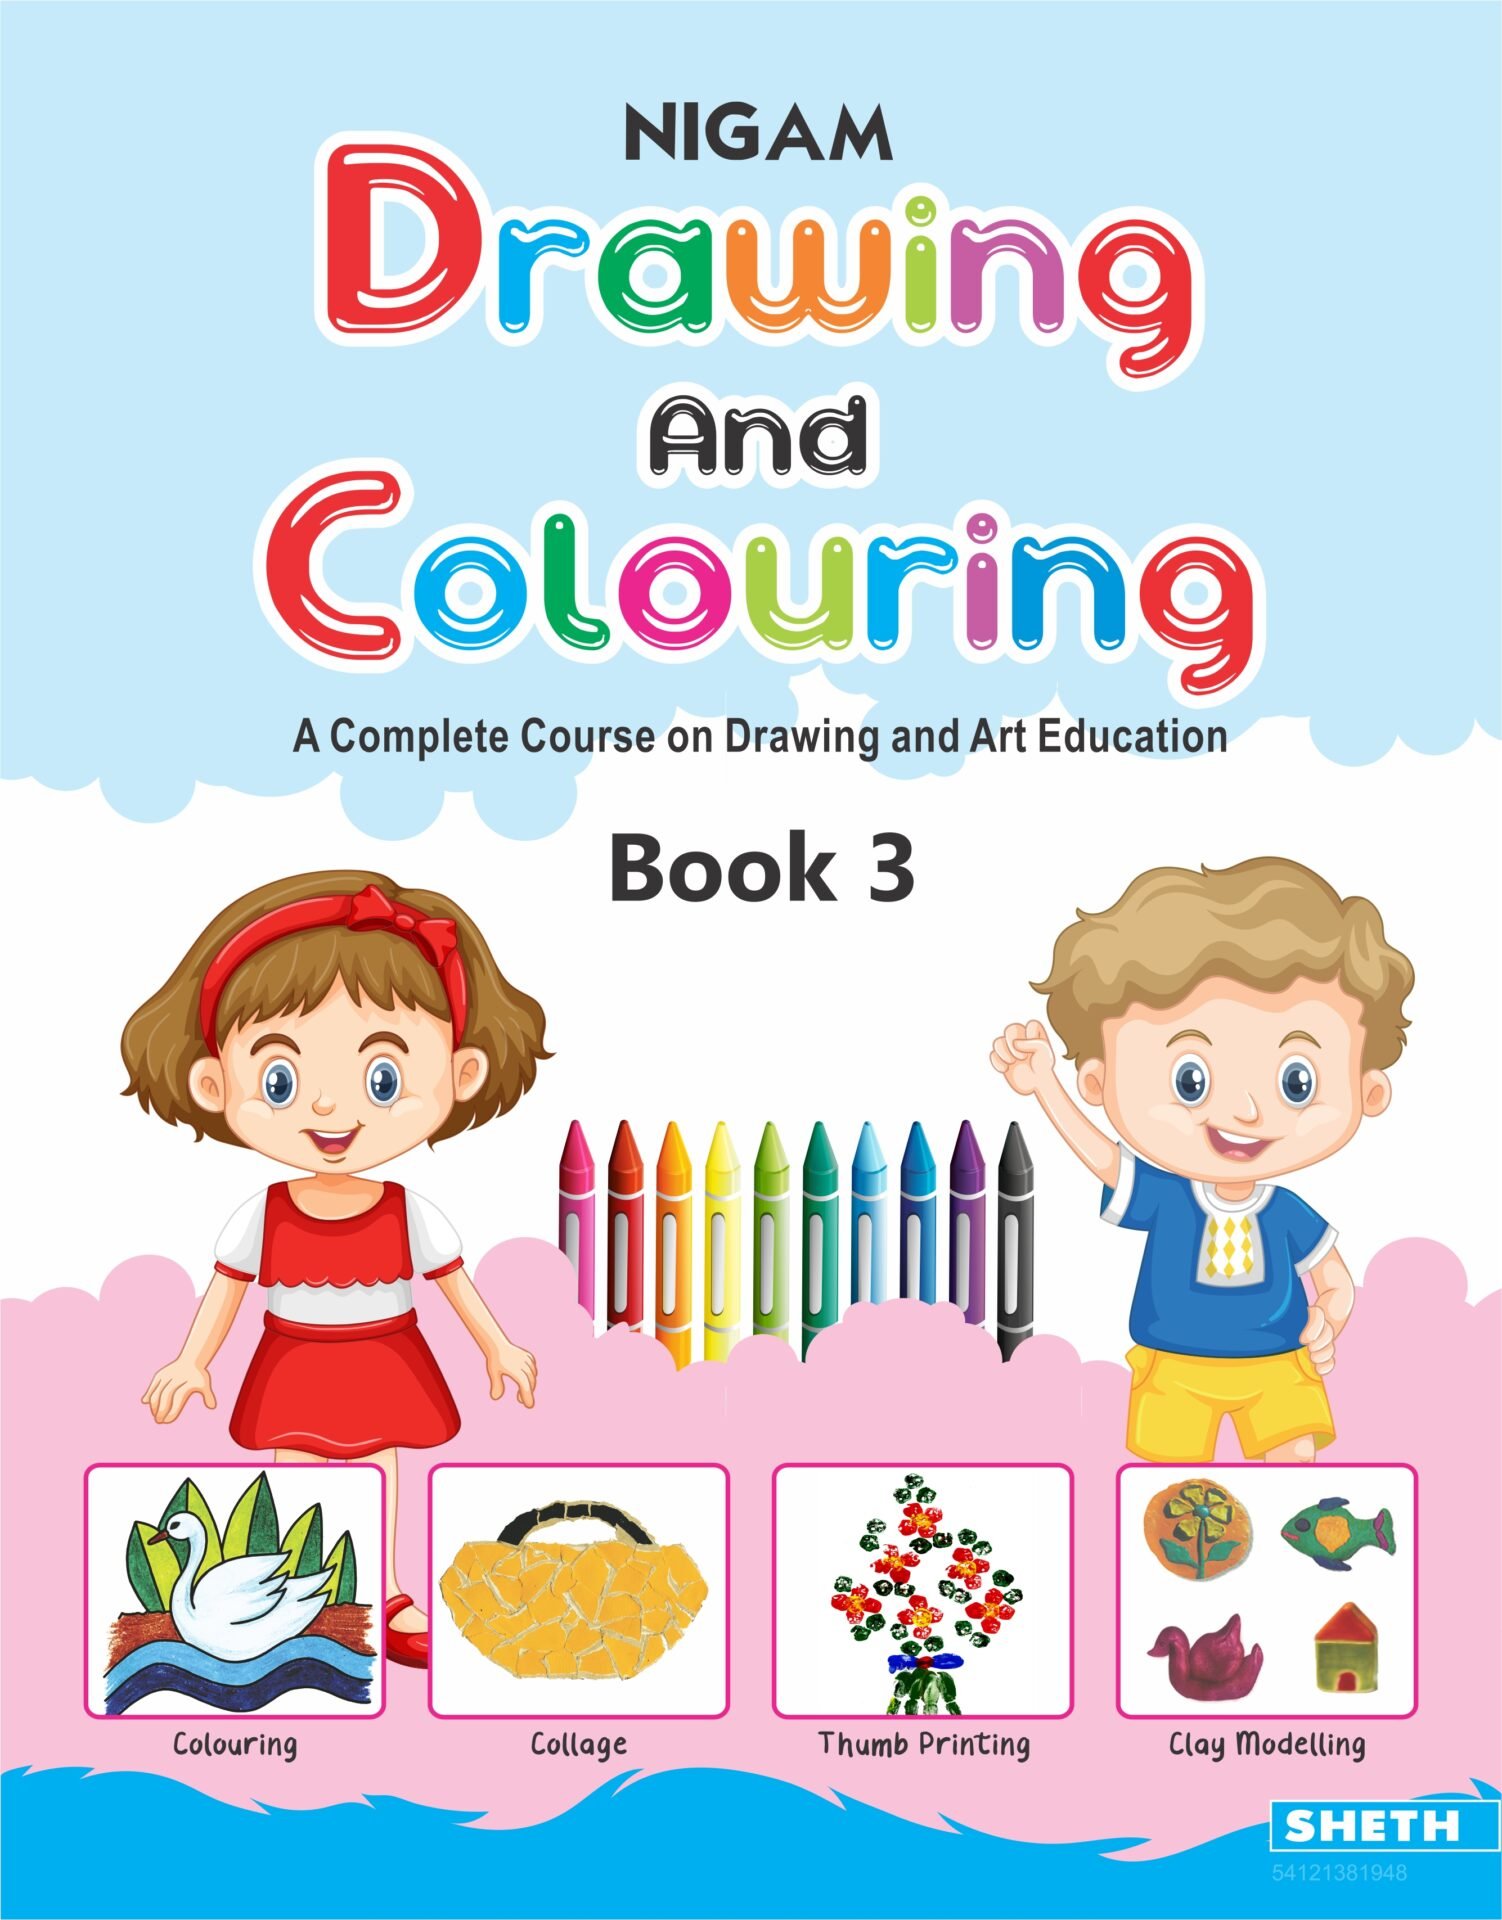 Nigam Drawing and Colouring Book 1 - Shethbooks